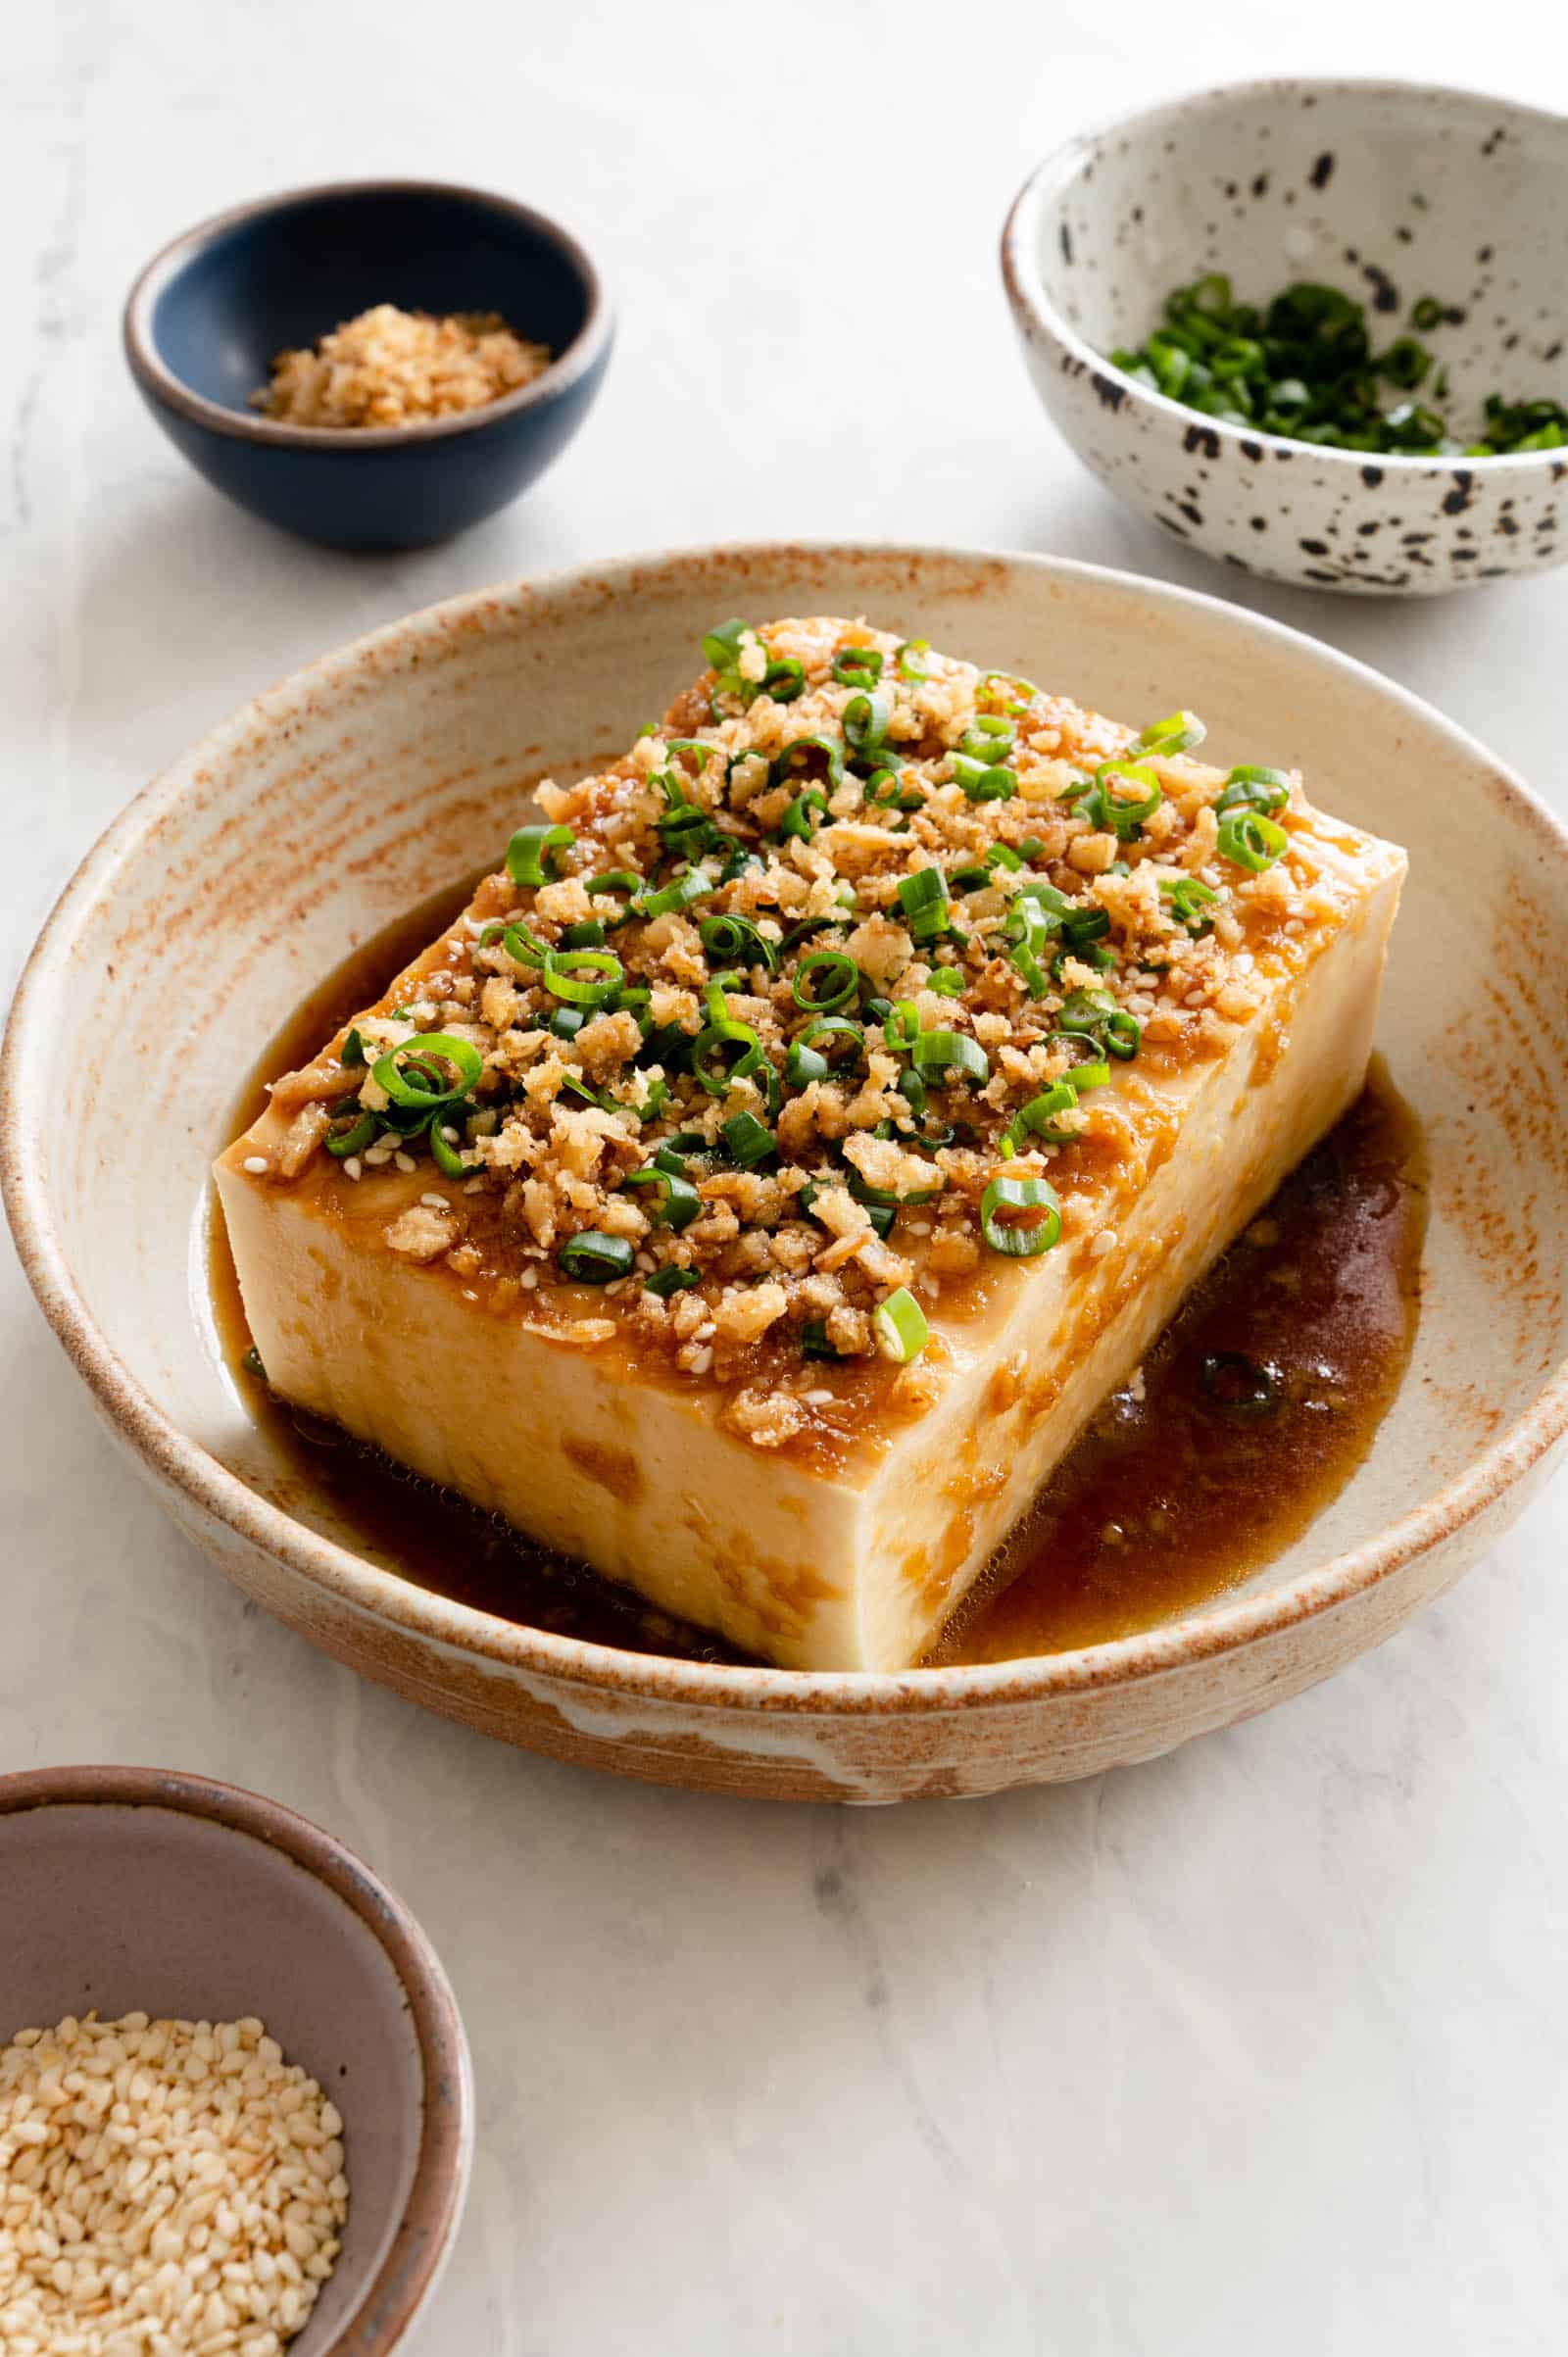 Cold Tofu with Tangy Soy Sauce